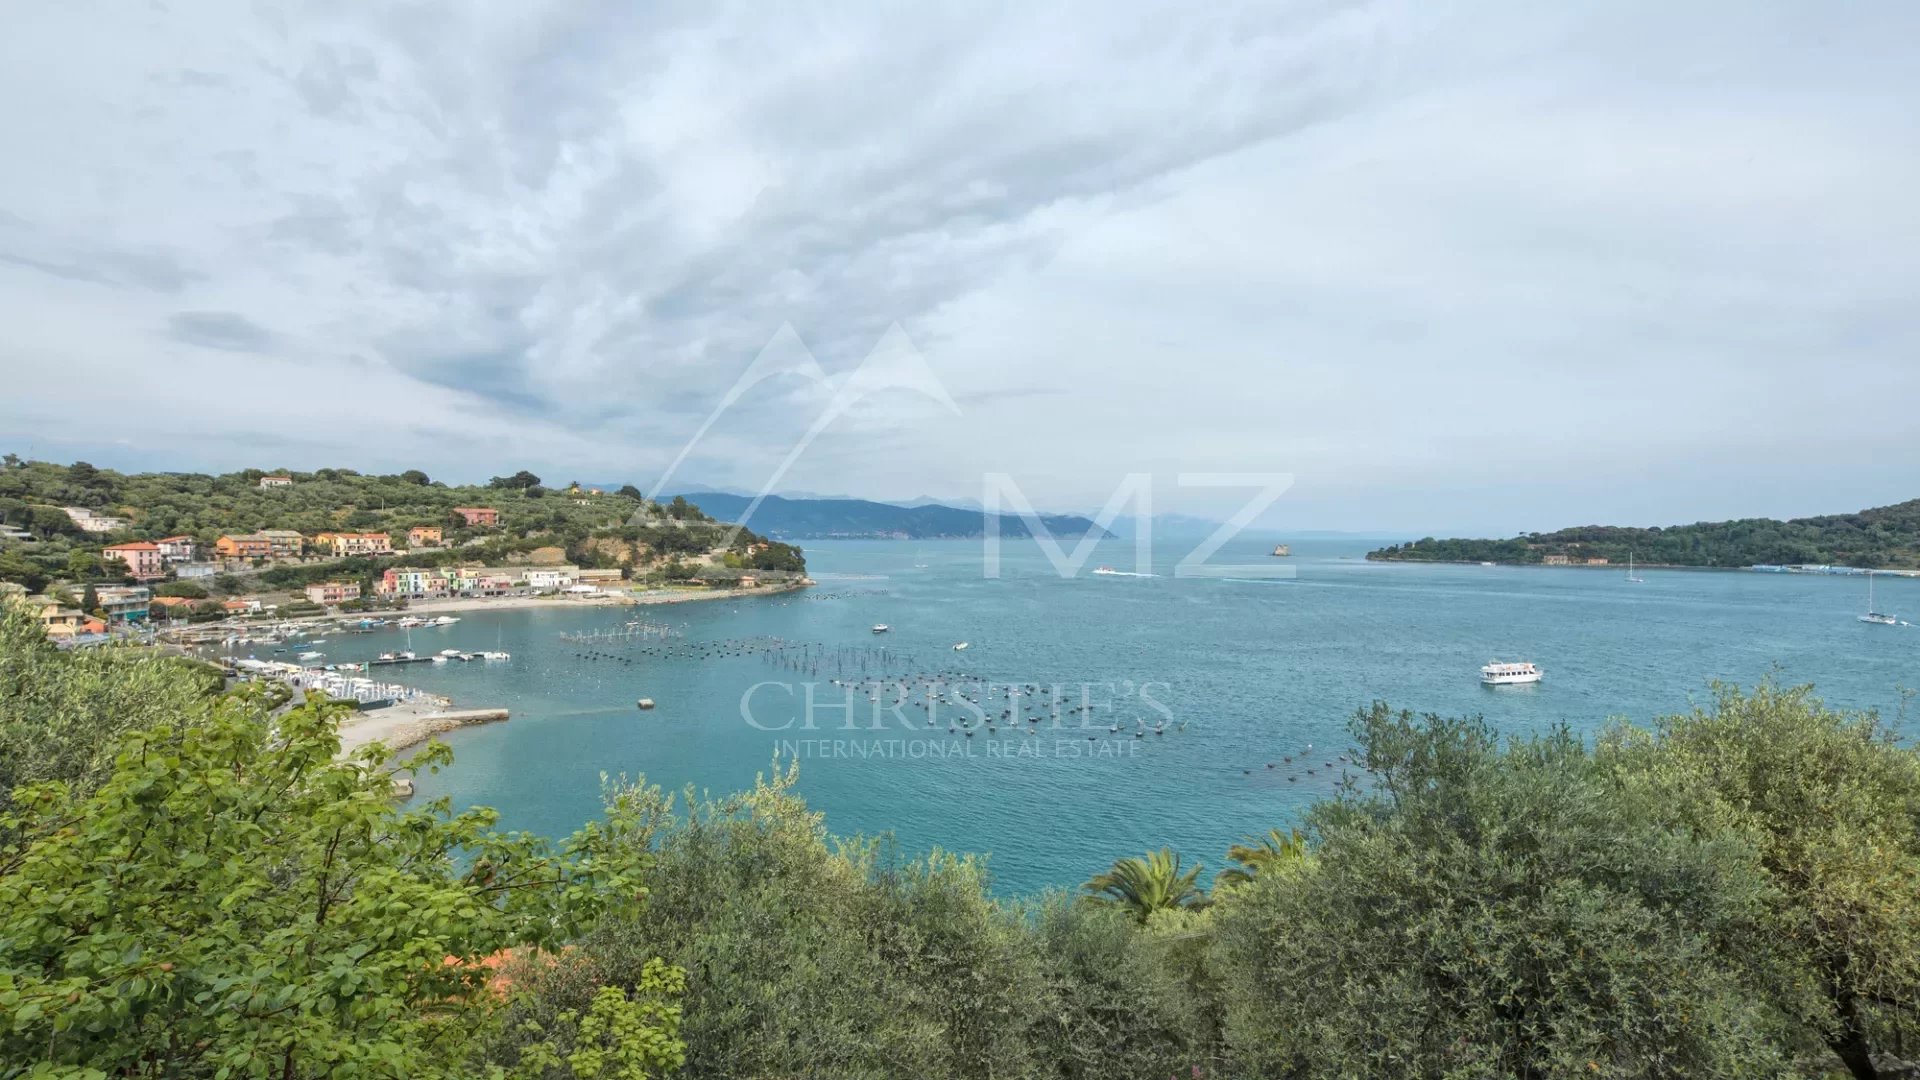 Prestigious historic villa with outbuildings, swimming pool and parking spaces, on the water in Portovenere